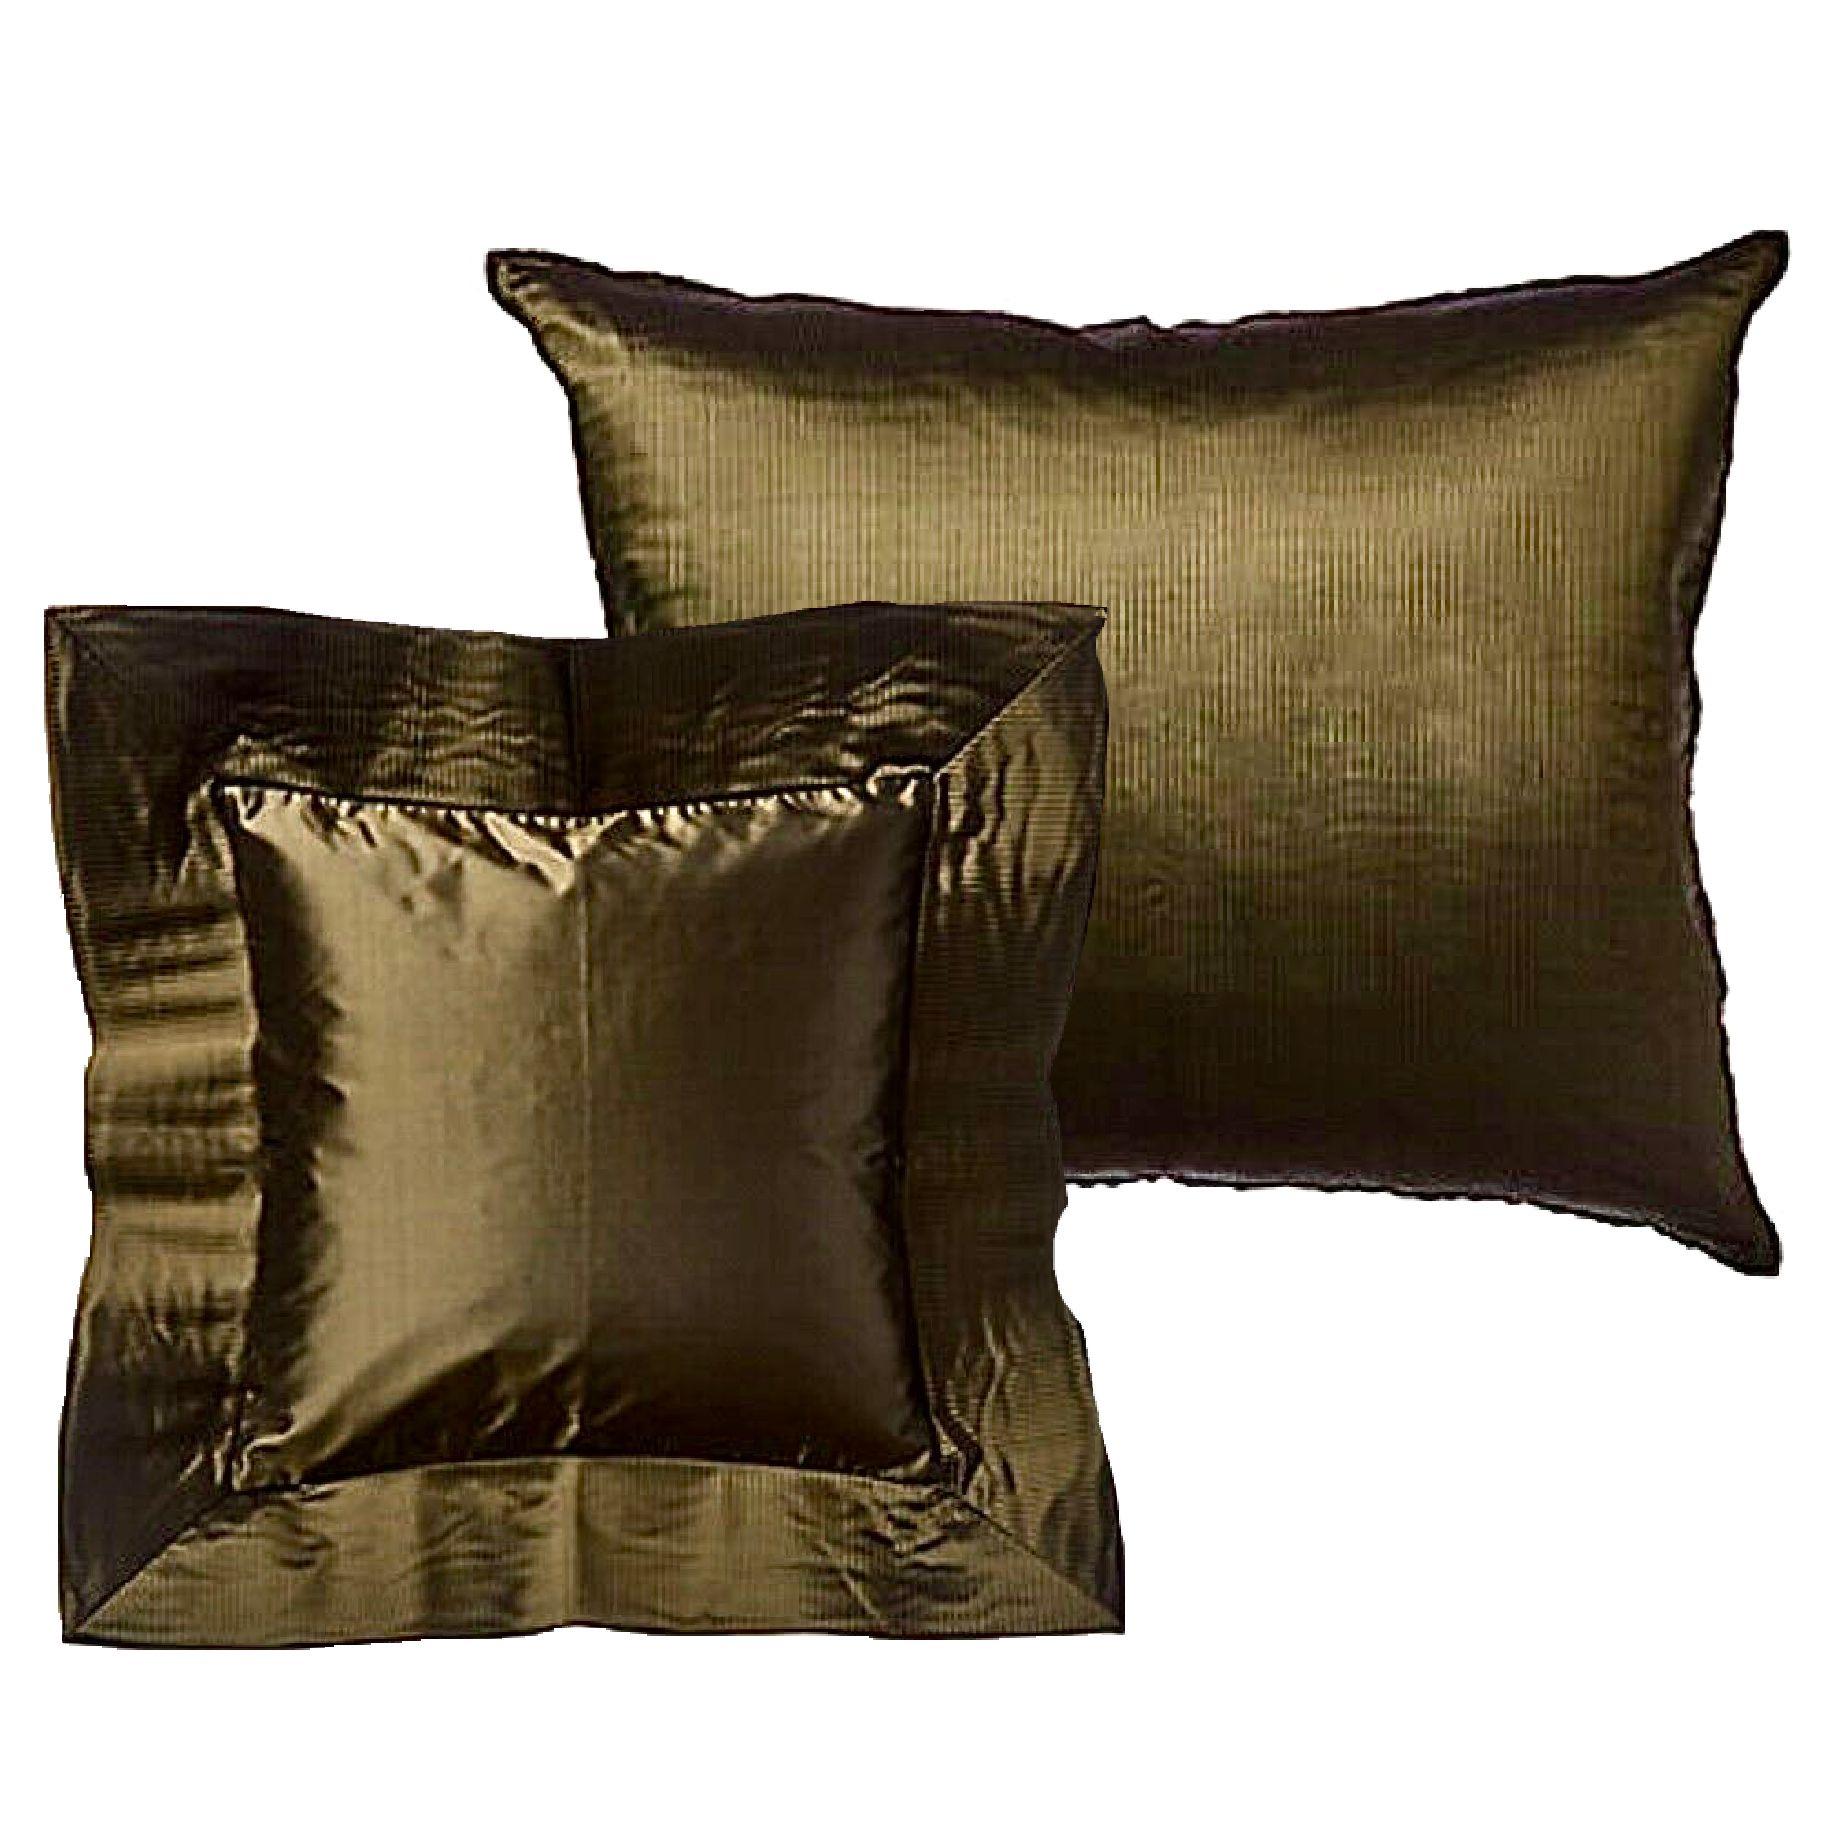 Rich Bronze Origami Pleated Silk Pillow Sham Pair, Square and Rectangular, Zip For Sale